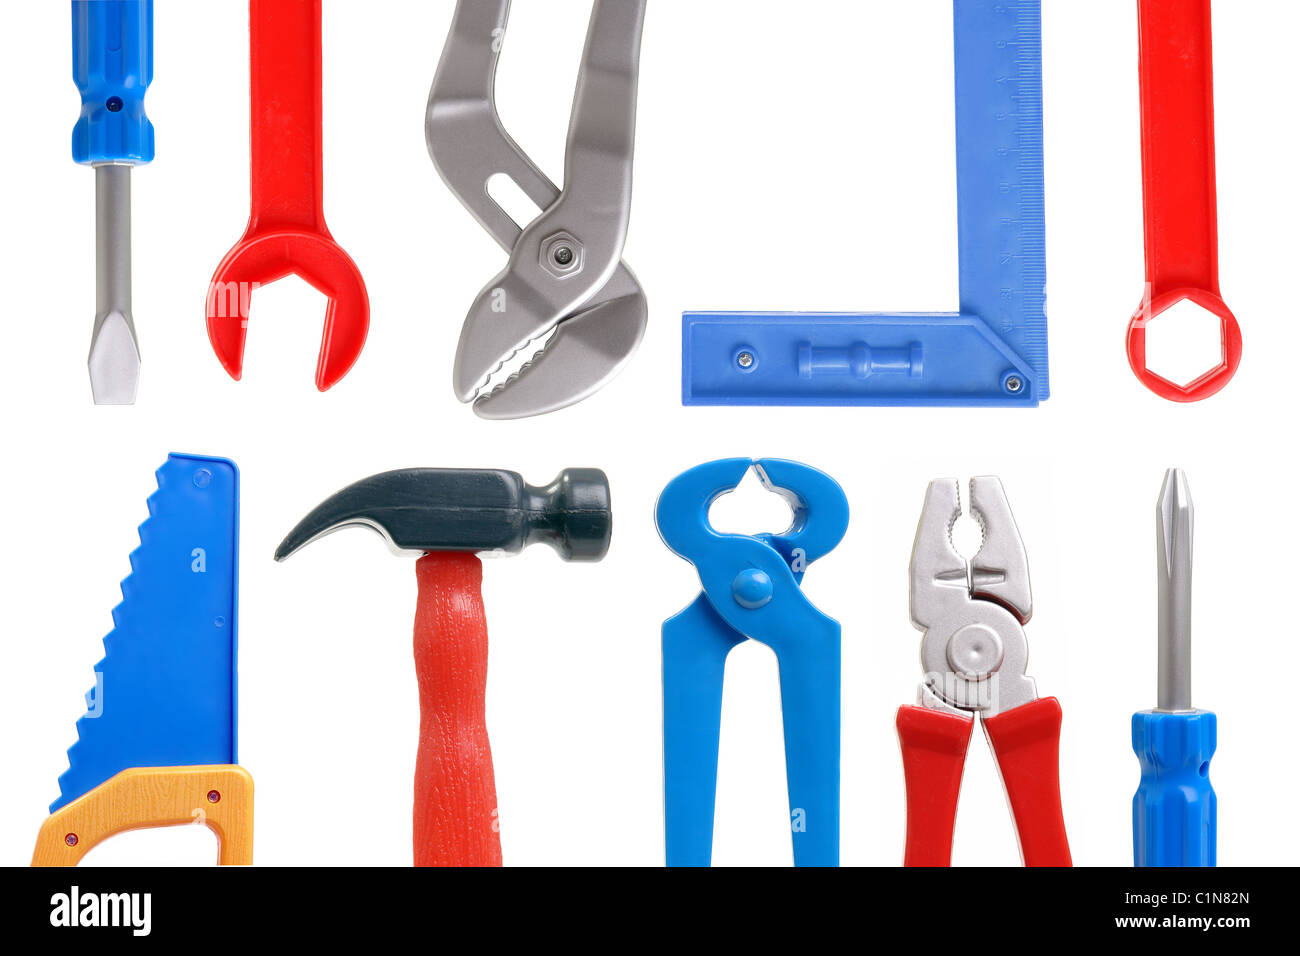 Set of plastic toy tools over white background Stock Photo